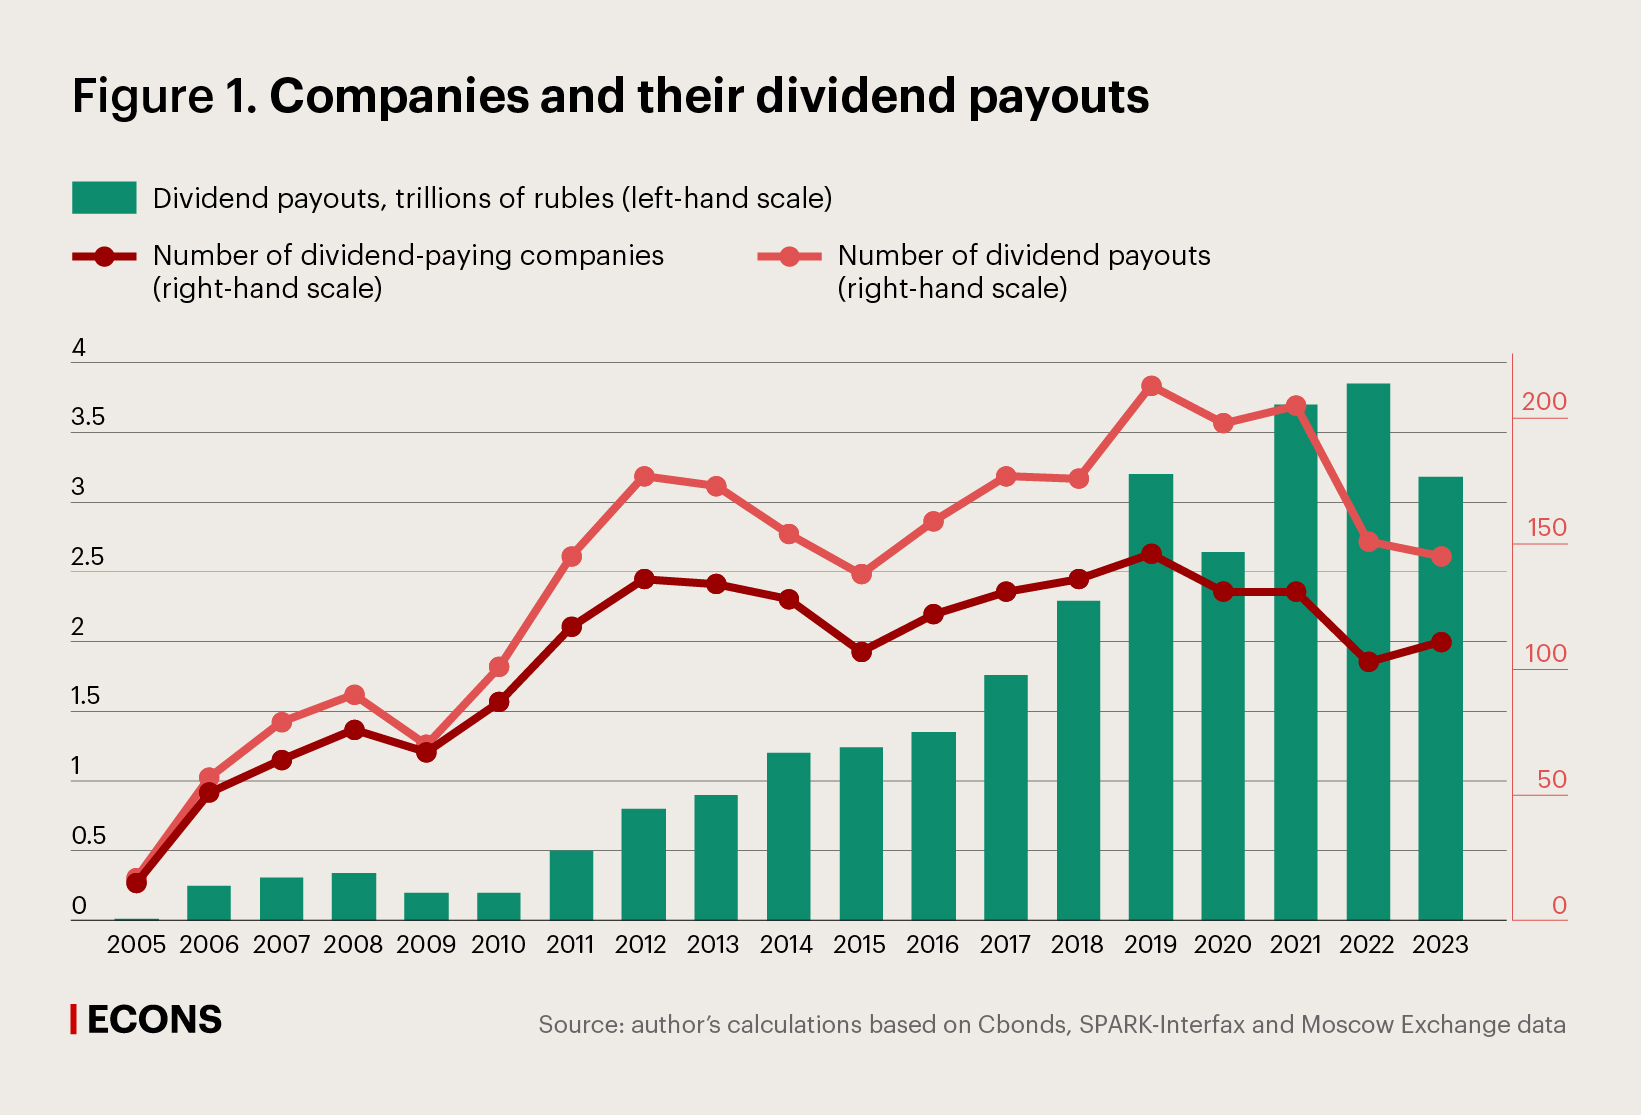 Companies and their dividend payouts